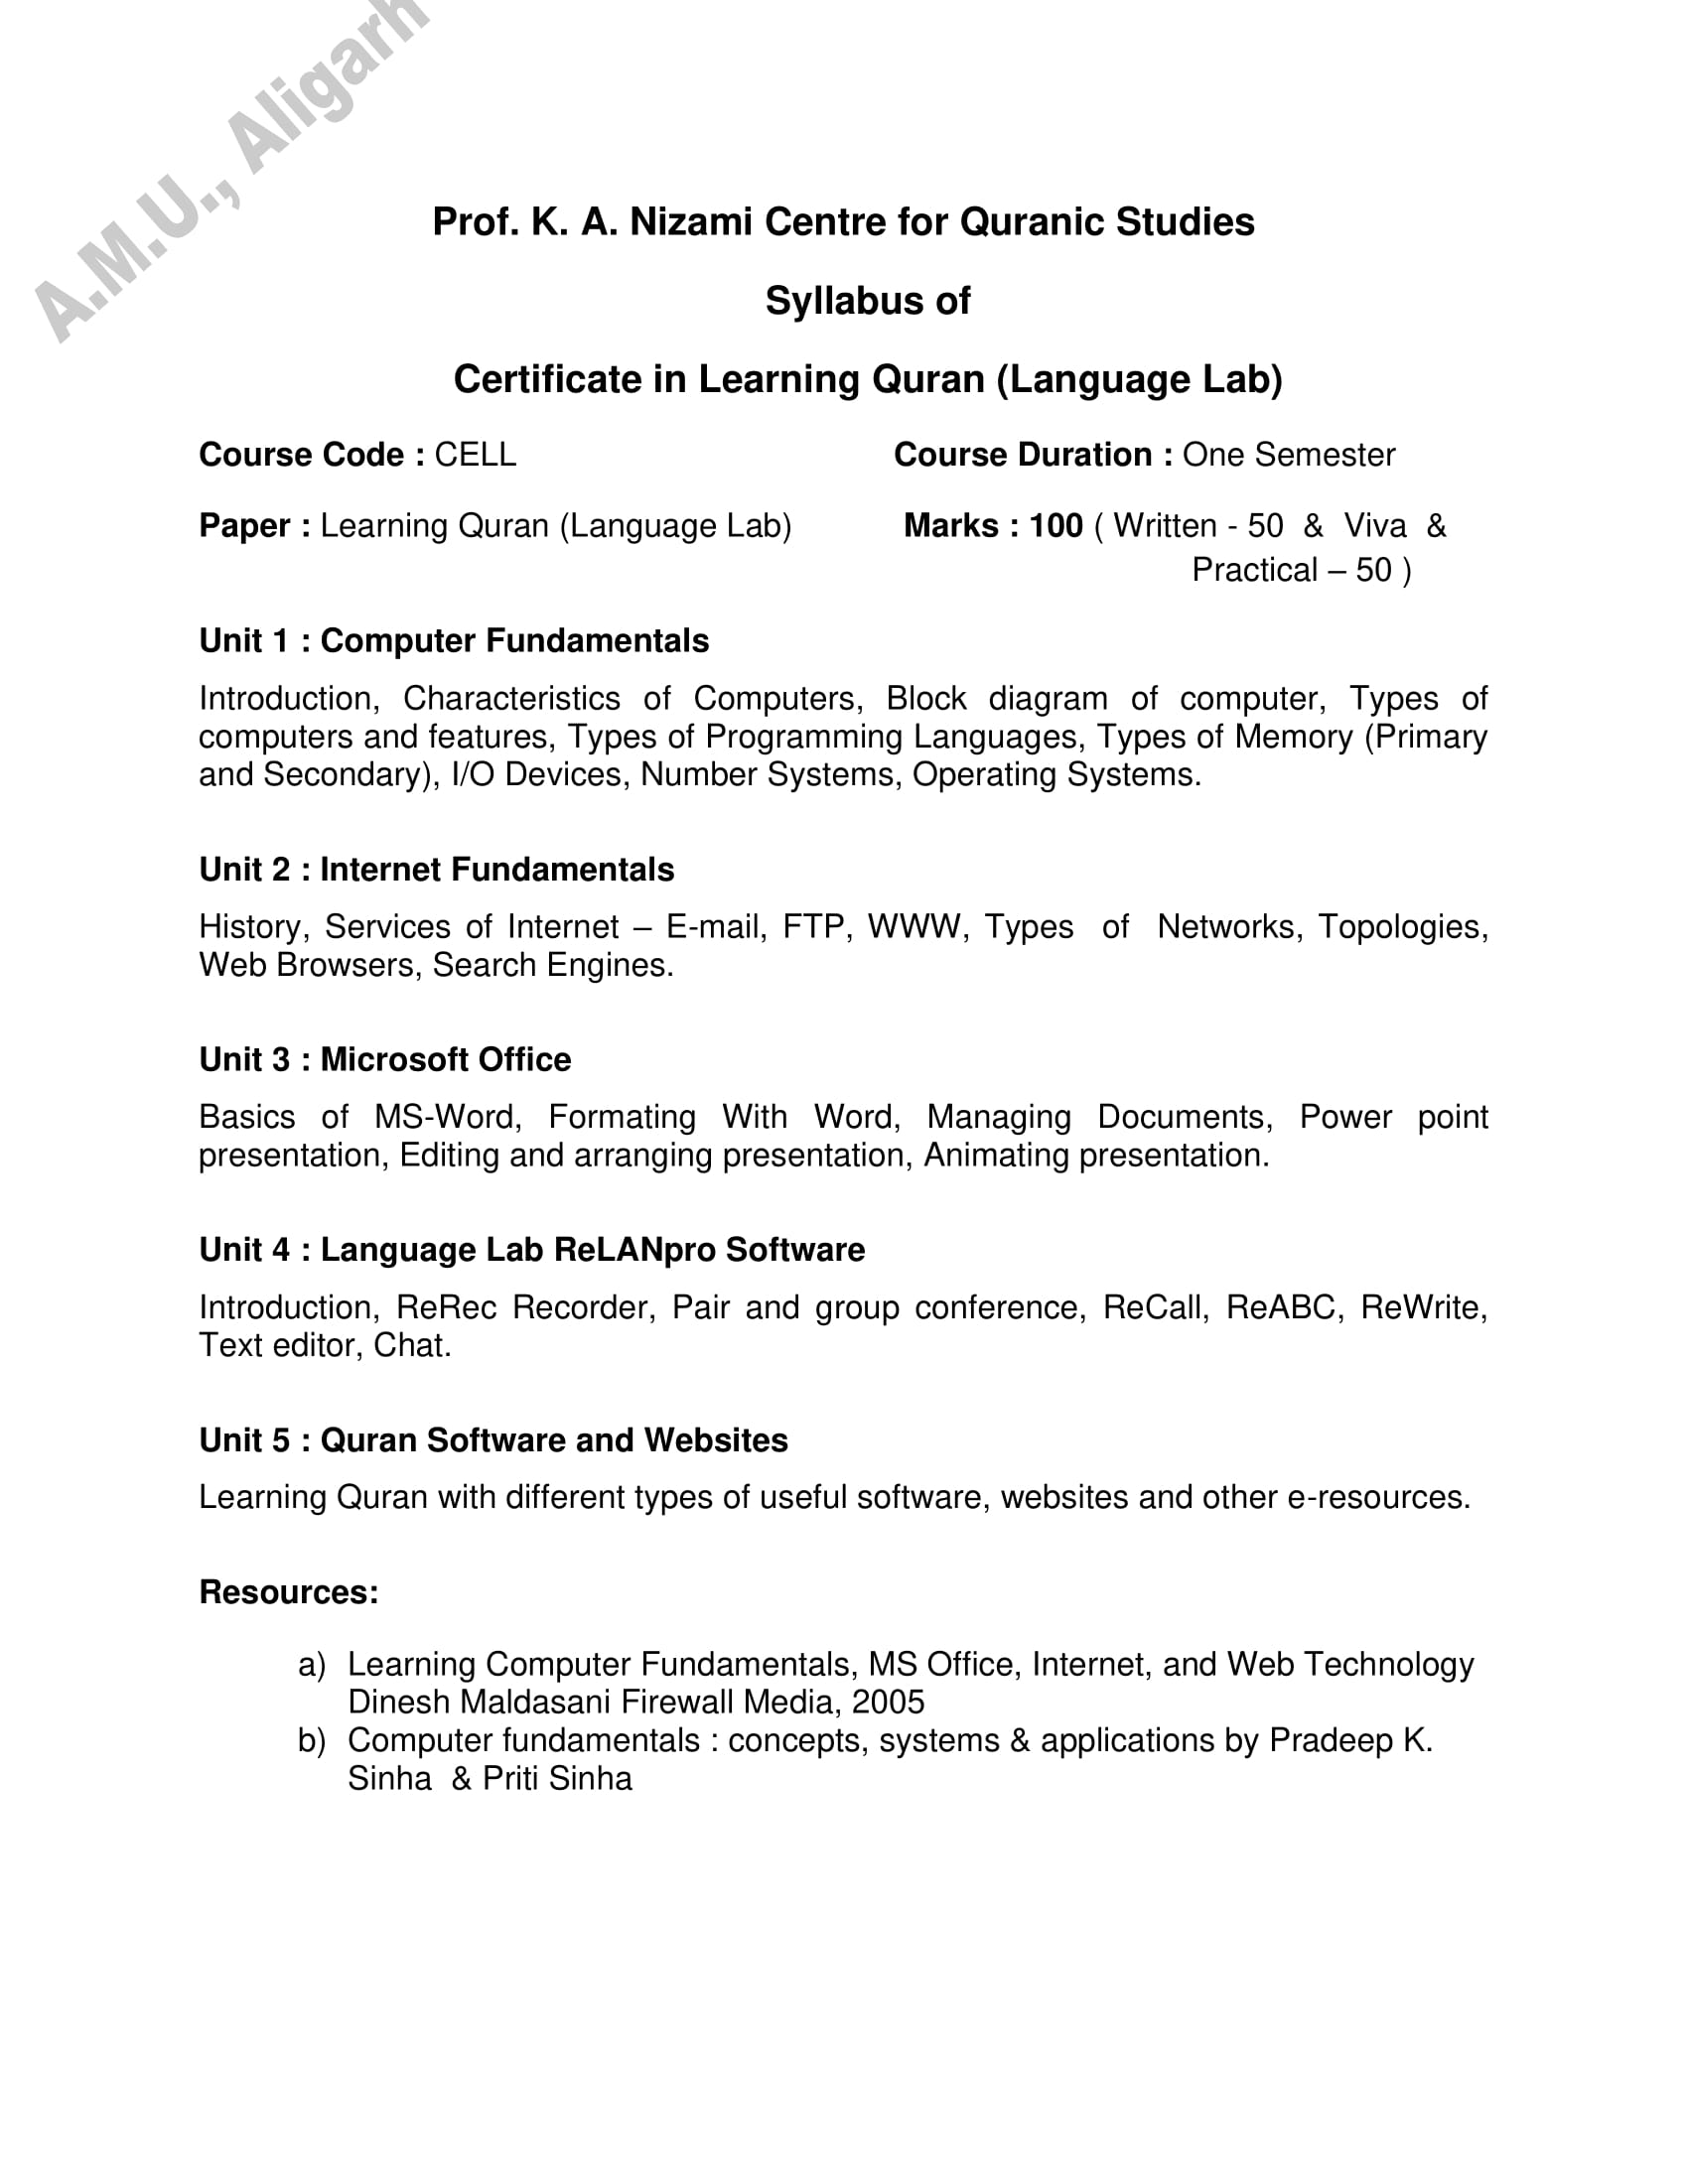 AMU Entrance Exam Syllabus for Certificate in Learning Quran (Language Lab)